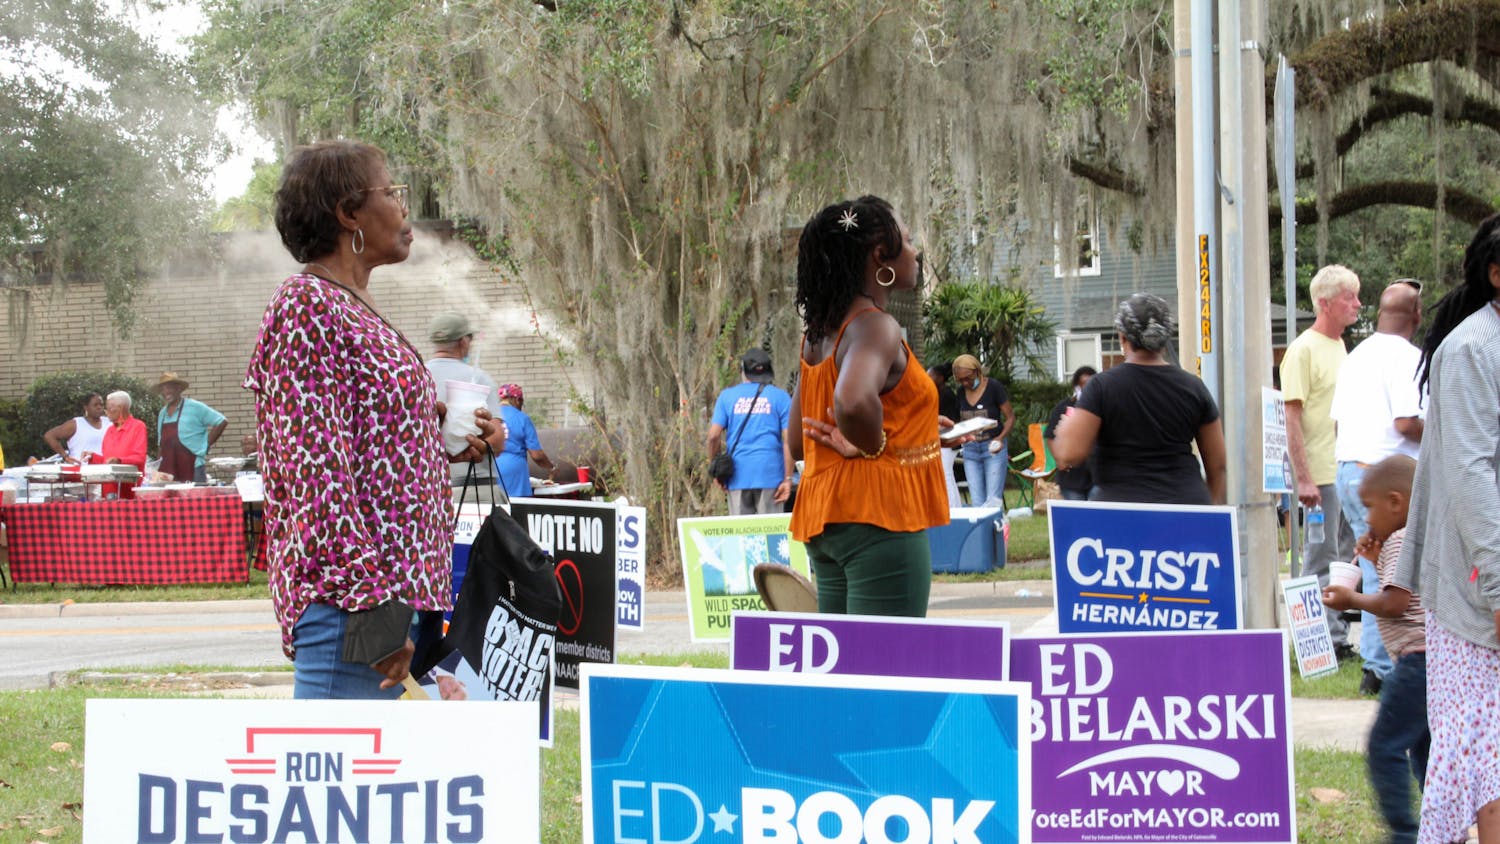 Voters listen to local candidates ﻿speak at the Souls to the Polls event held outside of the Alachua County Supervisor of Elections Office Sunday, Nov. 6, 2022.